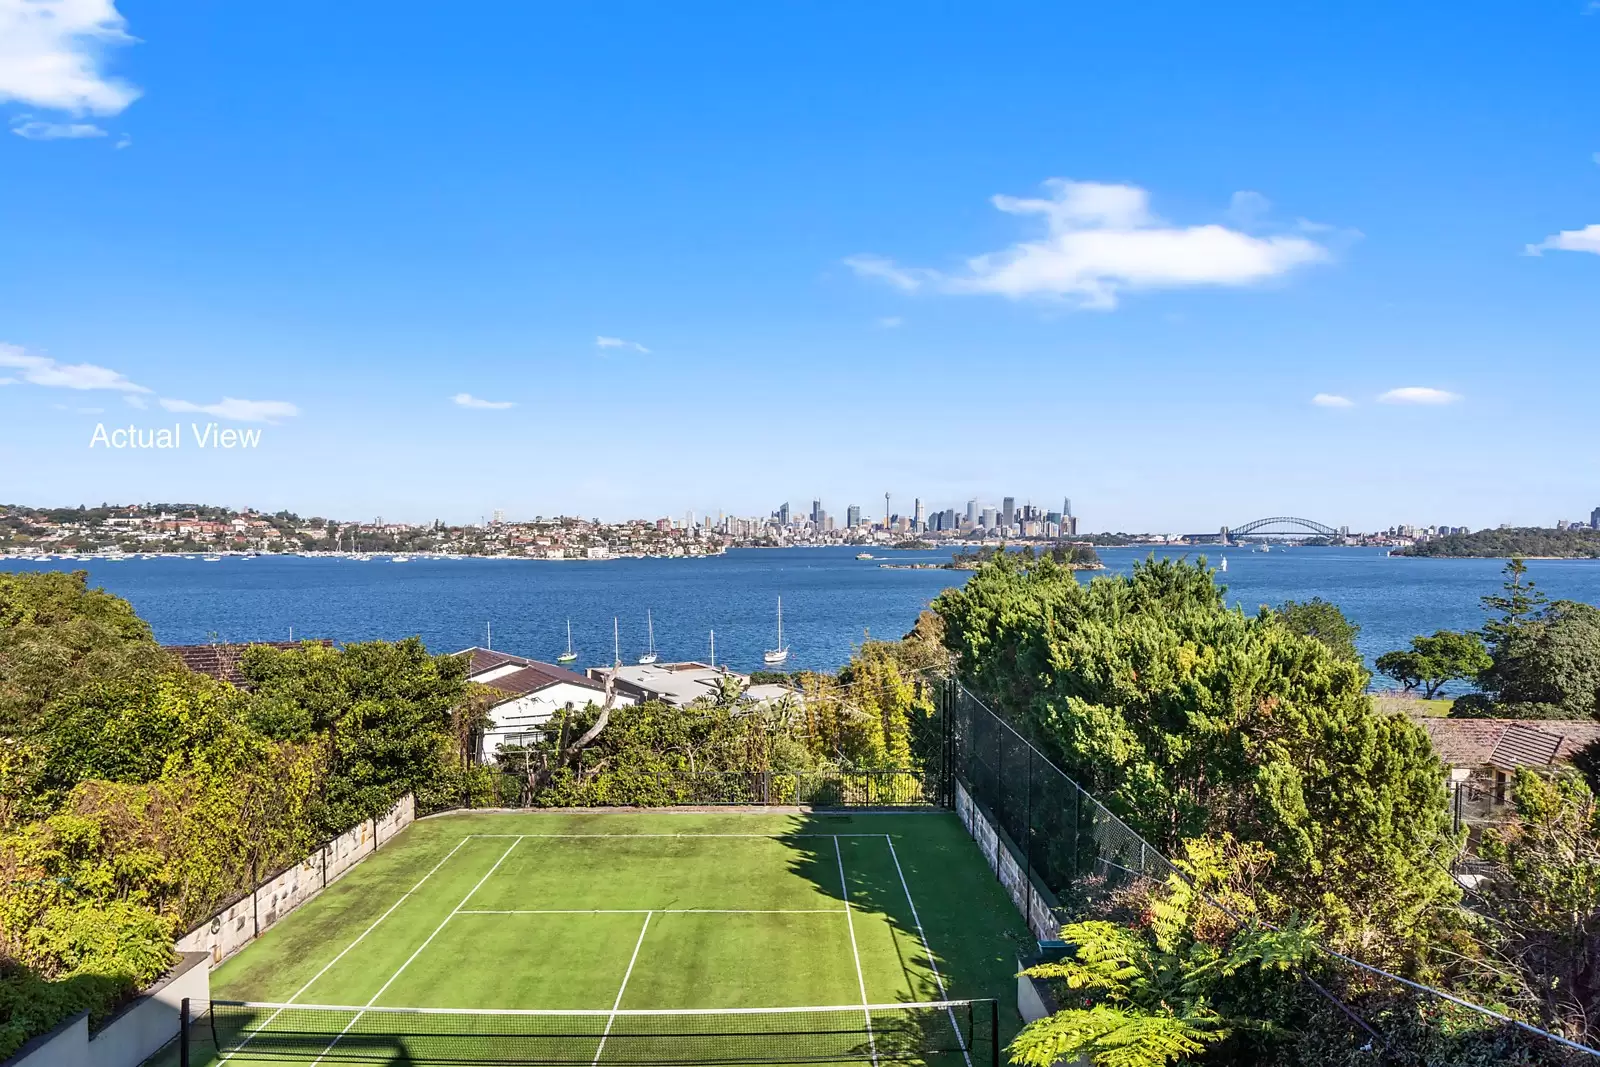 Photo #8: 42 Vaucluse Road, Vaucluse - Sold by Sydney Sotheby's International Realty